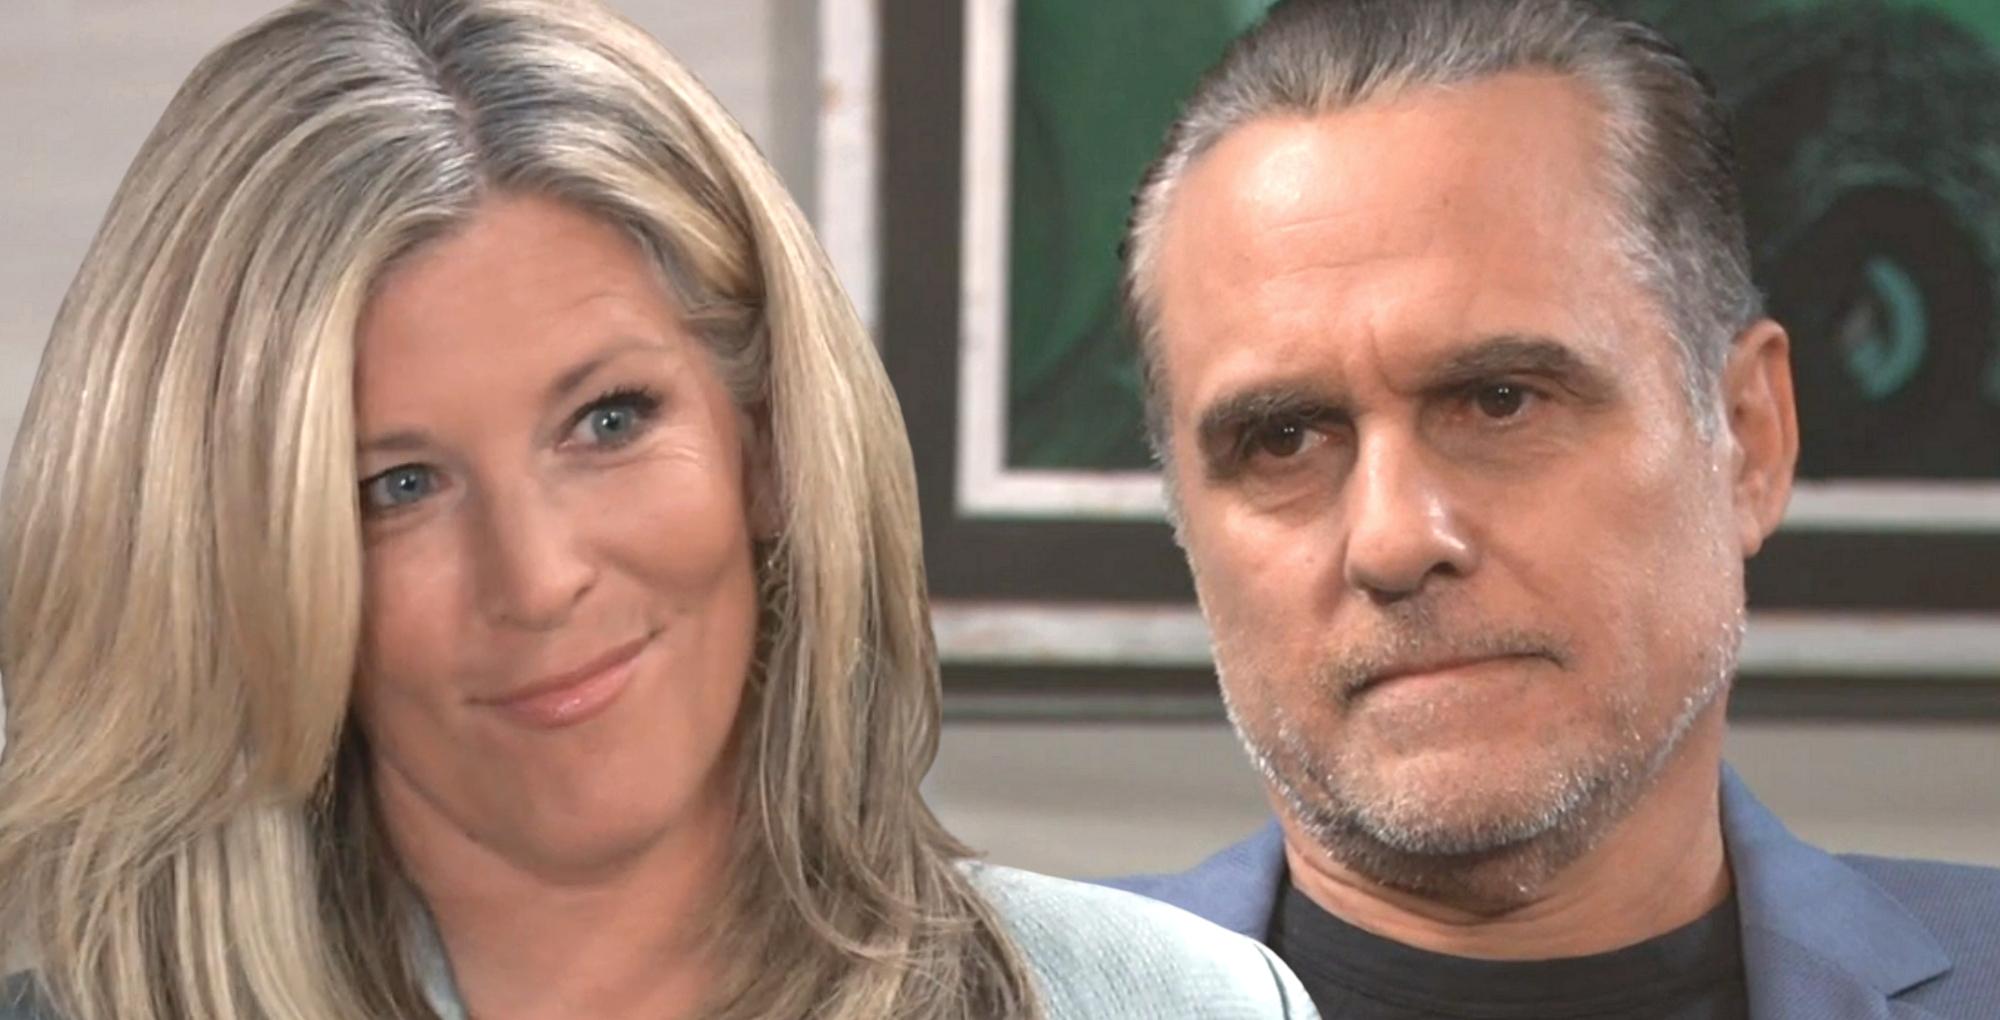 sonny corinthos and carly may reunite on general hospital.